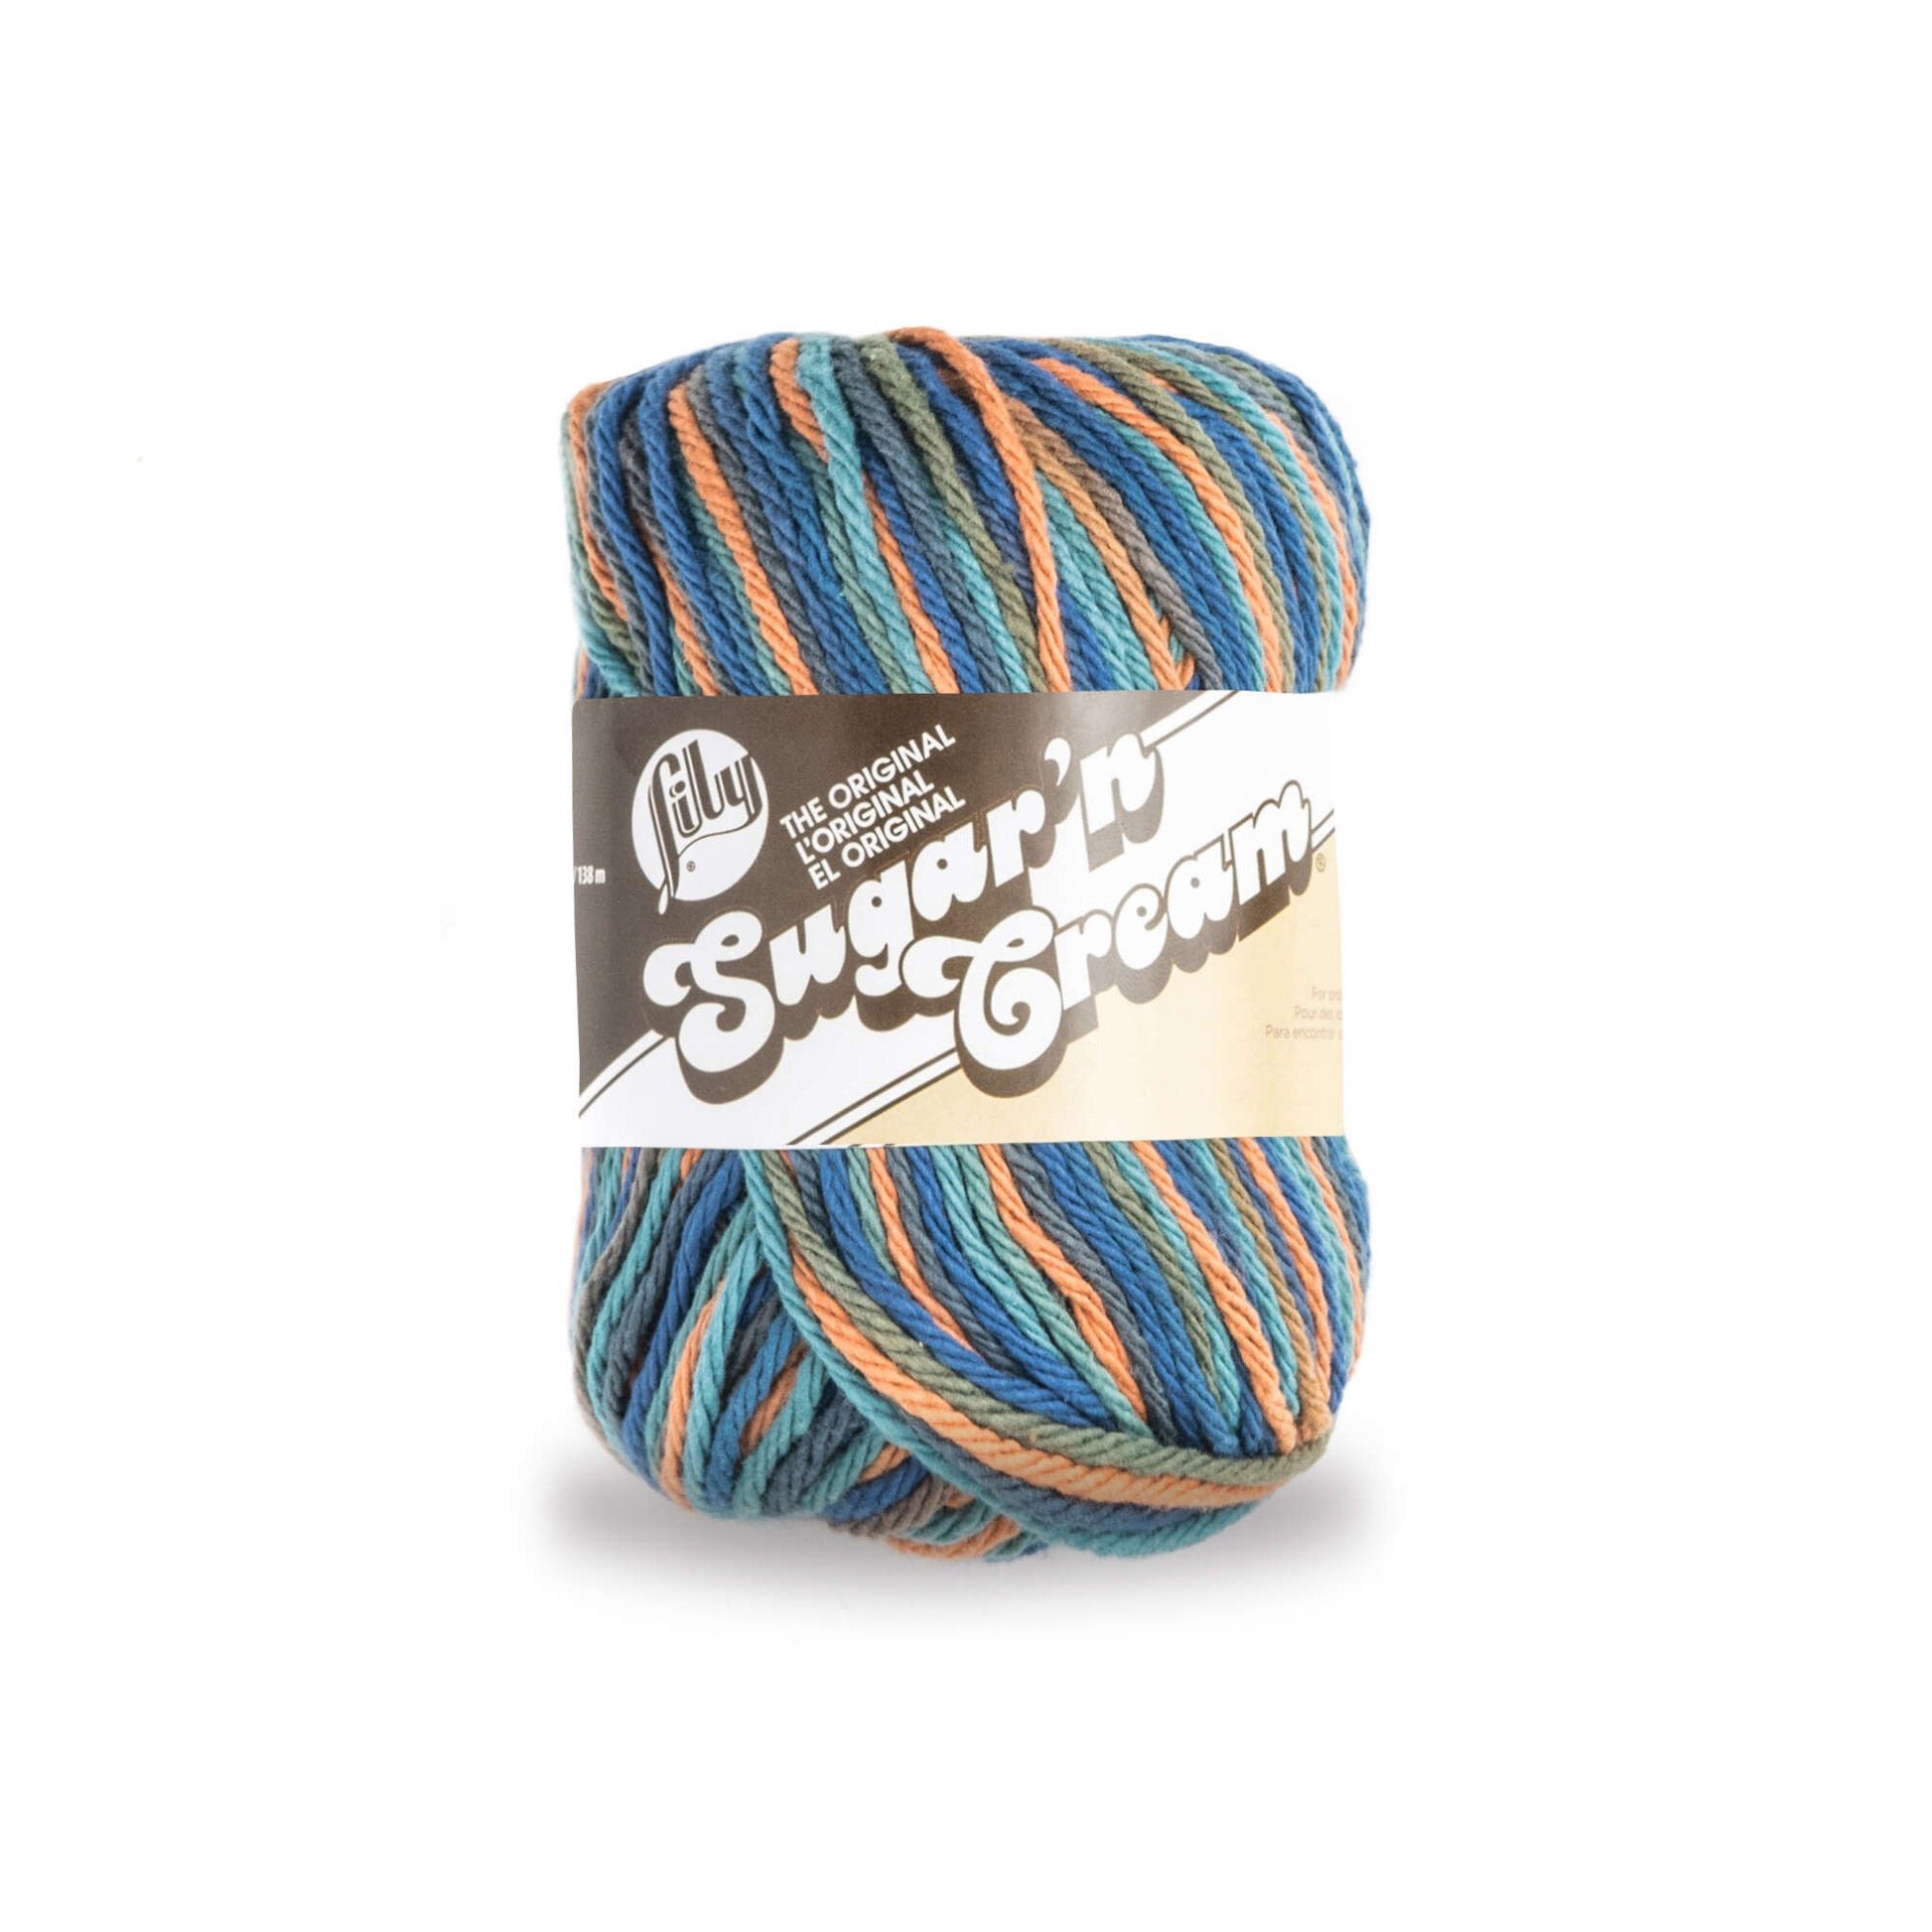 Lily Sugar'n Cream Super Size Ombres Yarn - Discontinued Shades